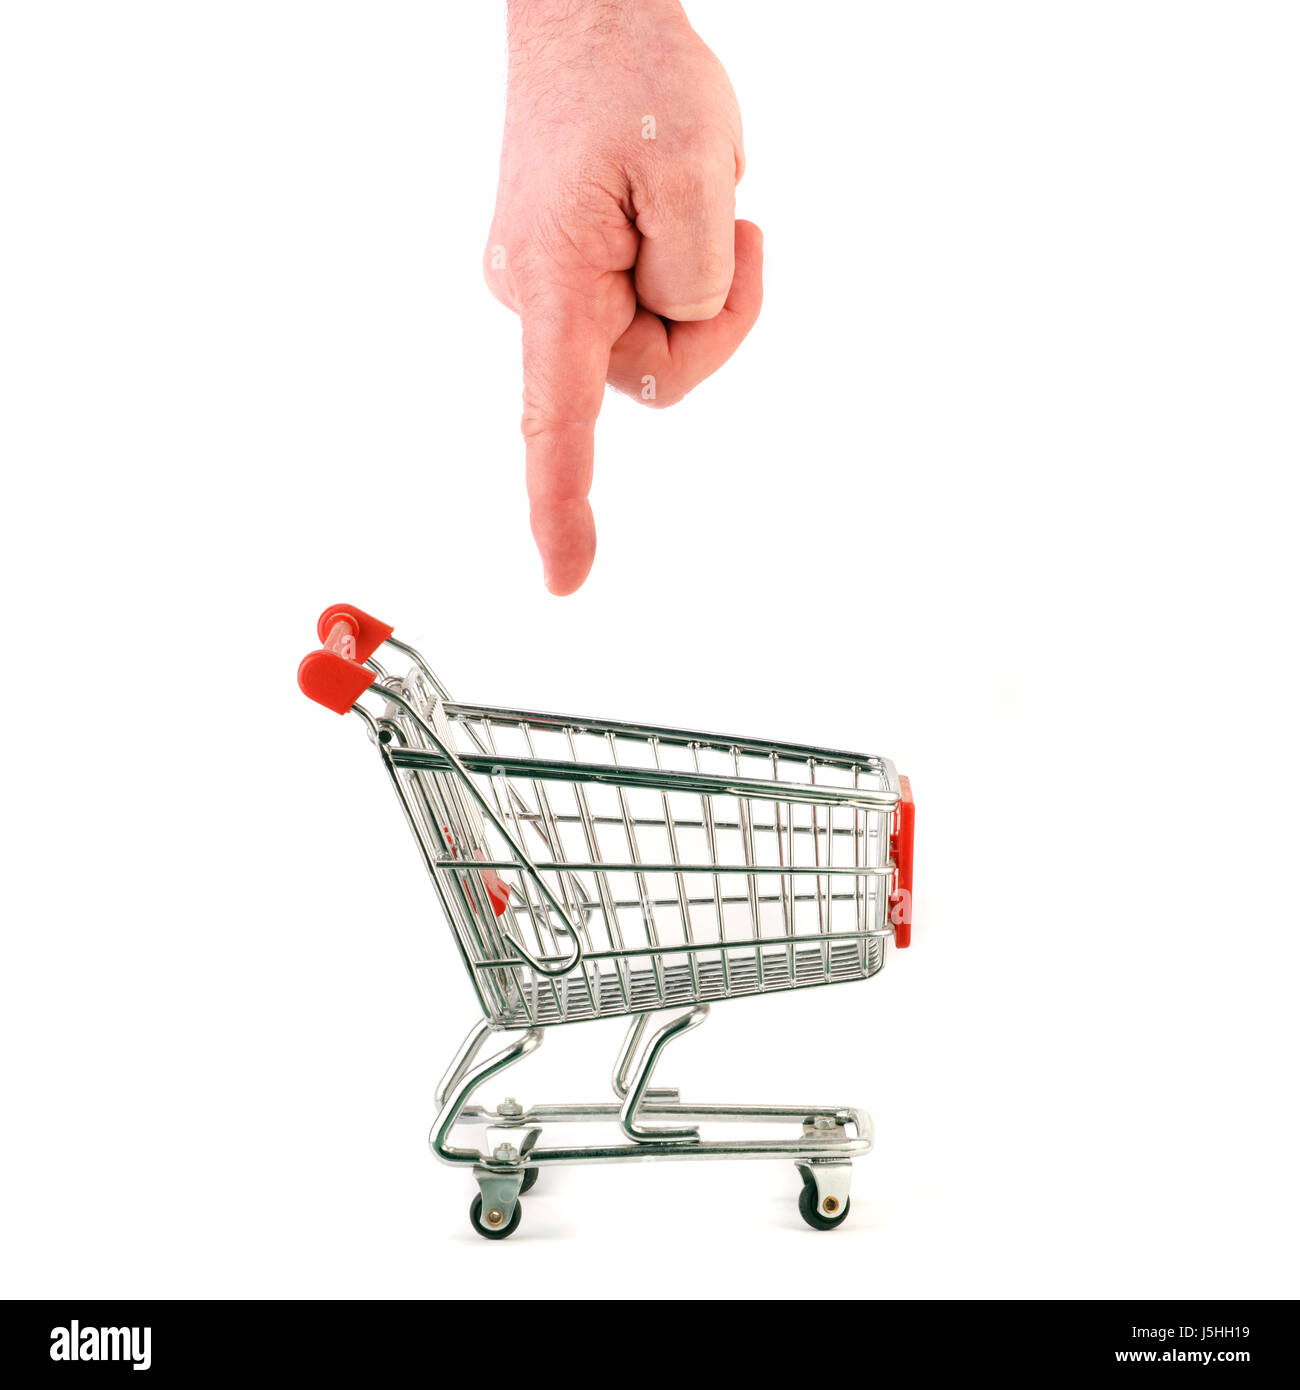 indicate show hand hands consumption shopping buy supermarket trolley cart Stock Photo